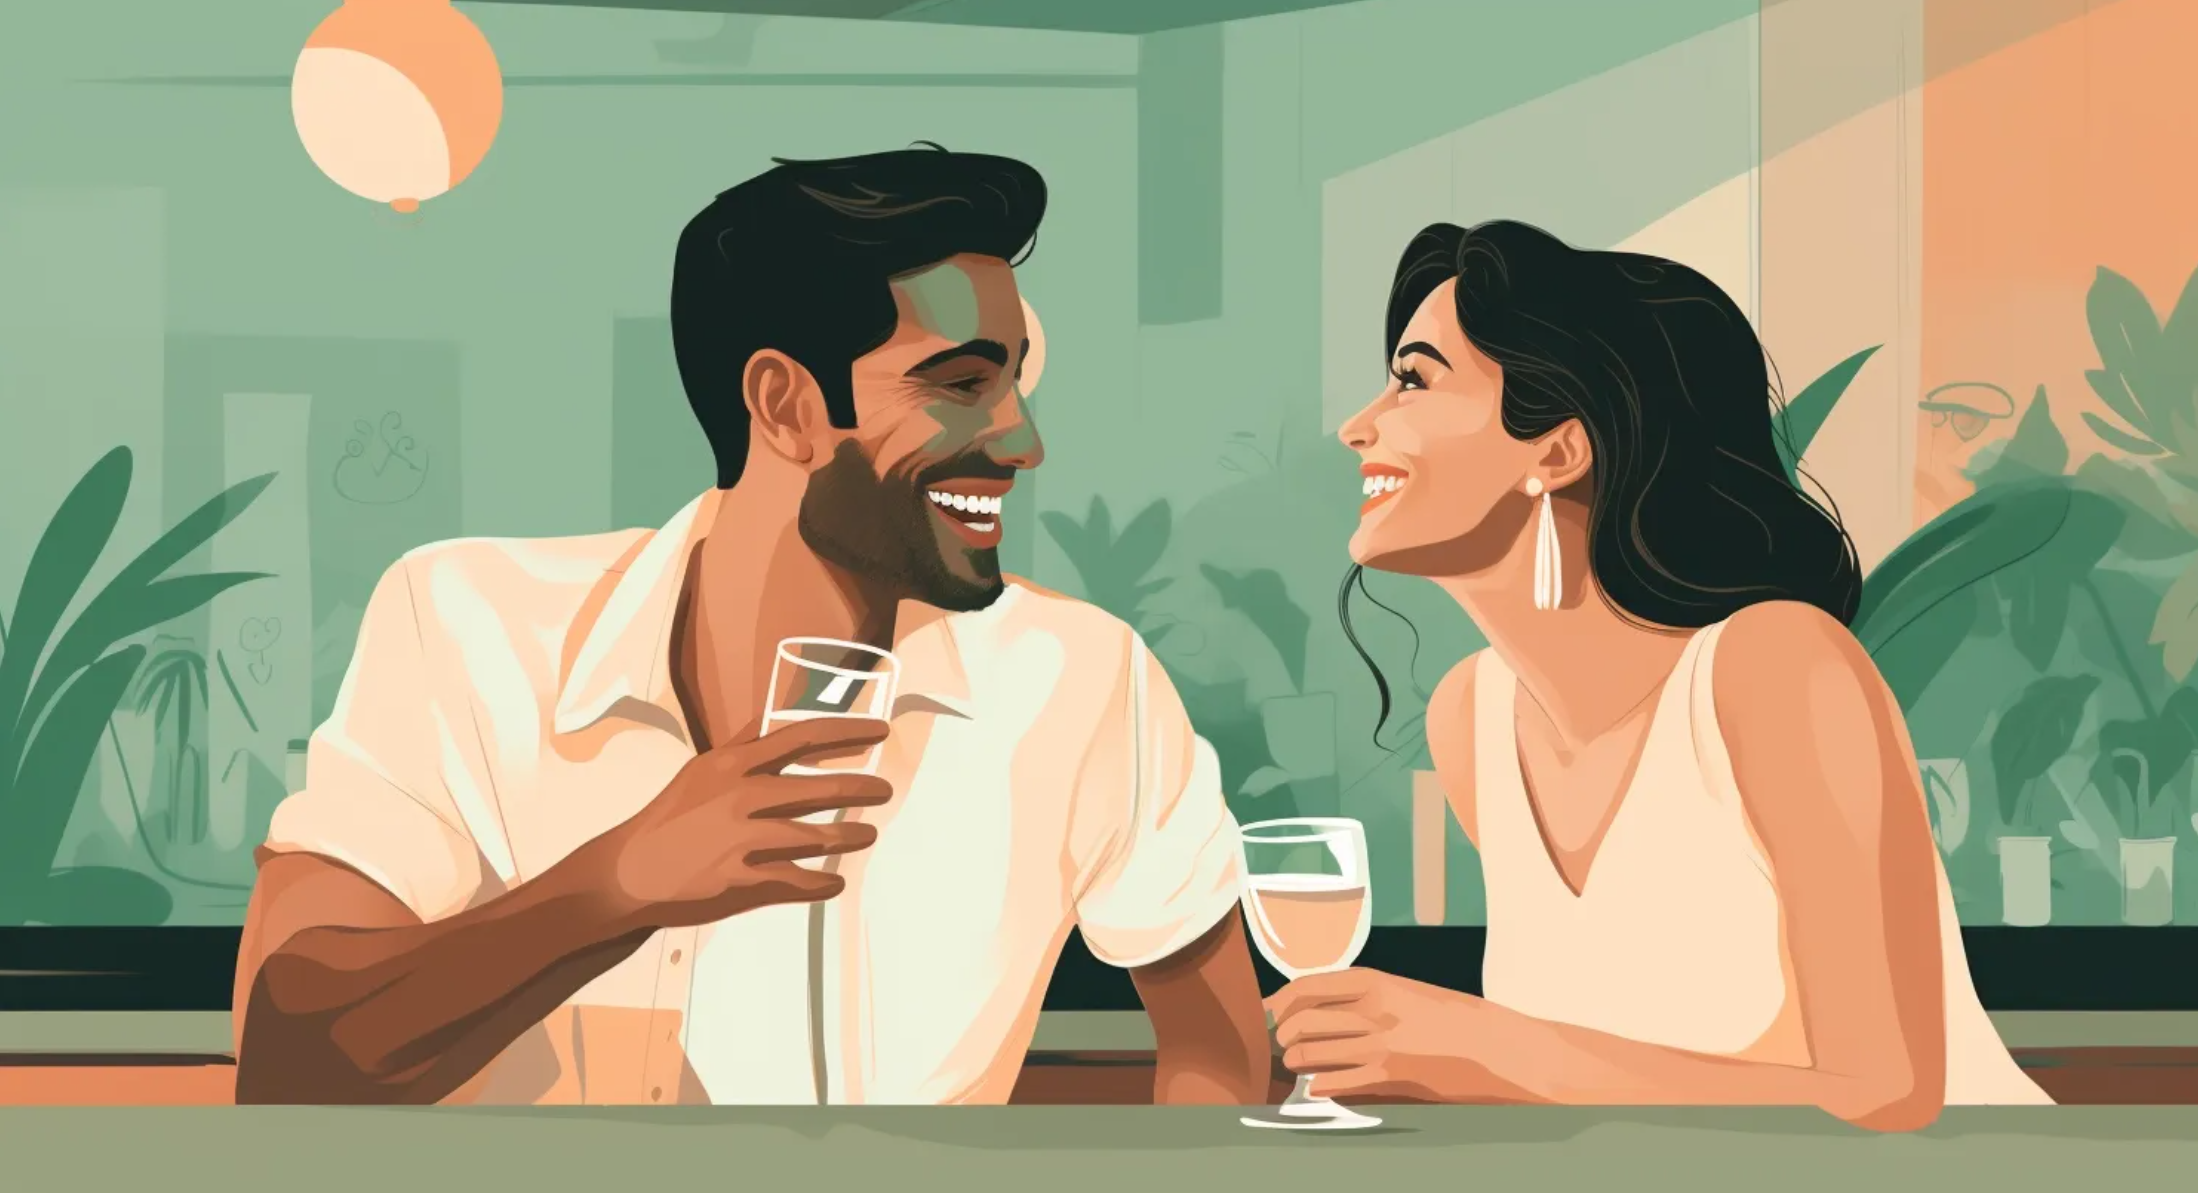 An illustrated photo of a man and a woman sitting at a bar together smiling at each other over drinks.